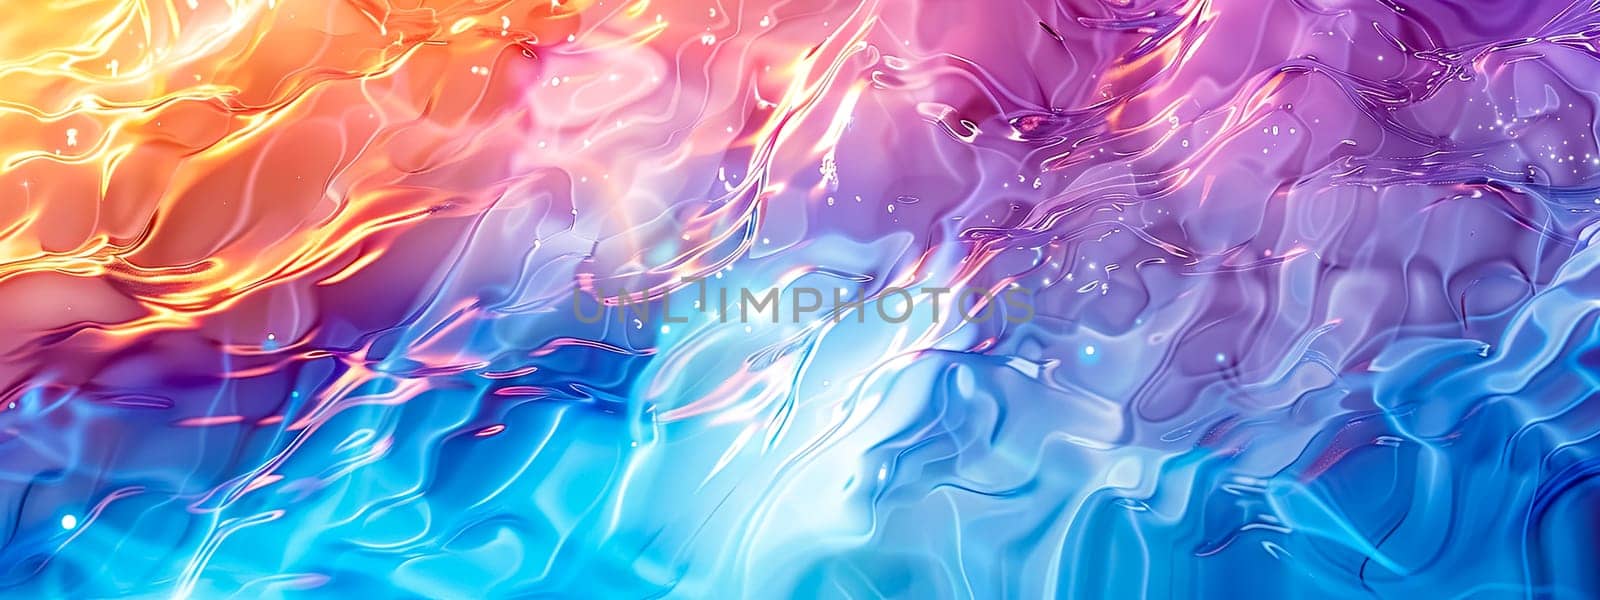 Fluid Abstract Art with Warm and Cool Color Spectrum by Edophoto